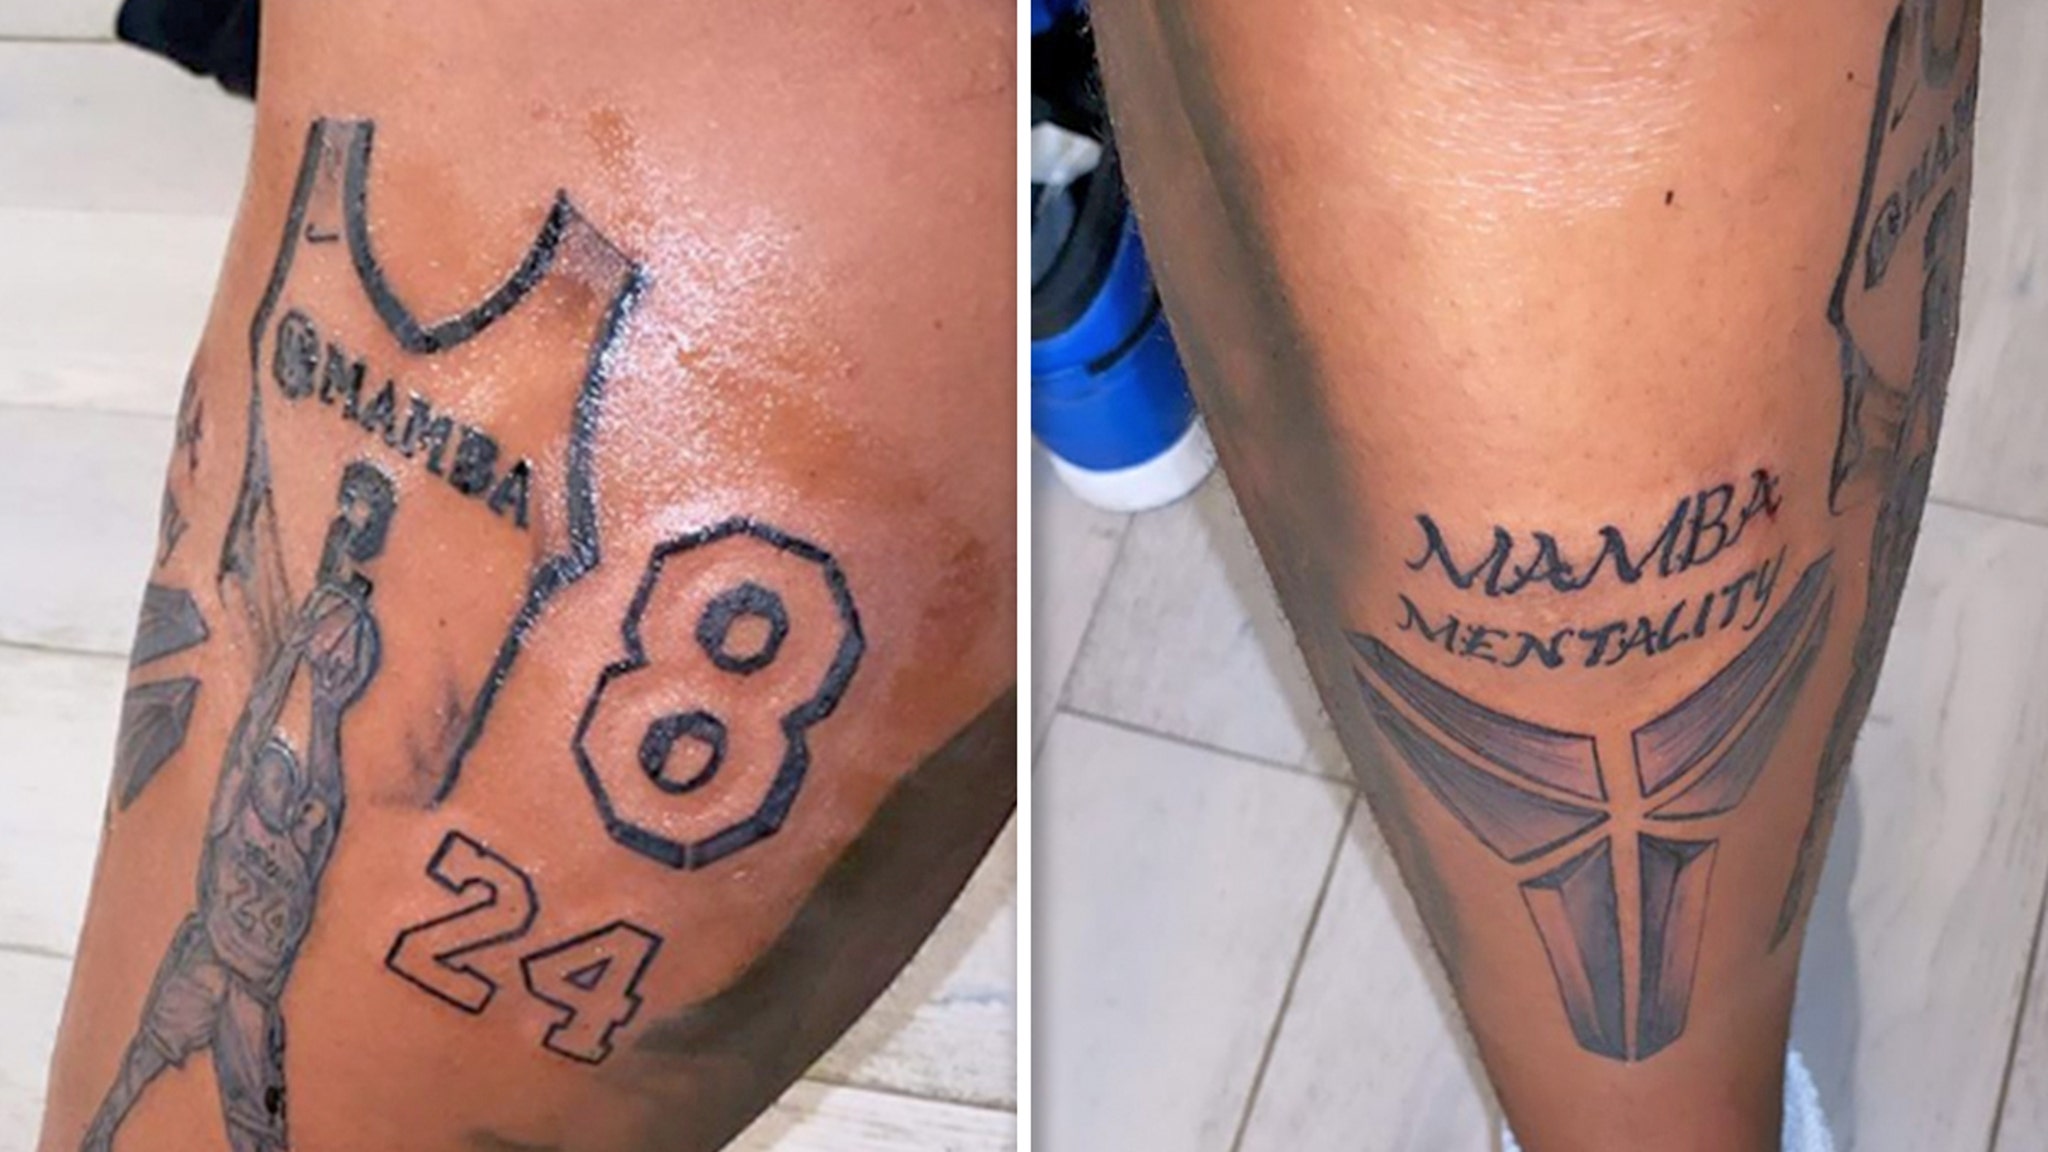 Kobe and Gianna Bryant honored with tattoos by Shaq's son